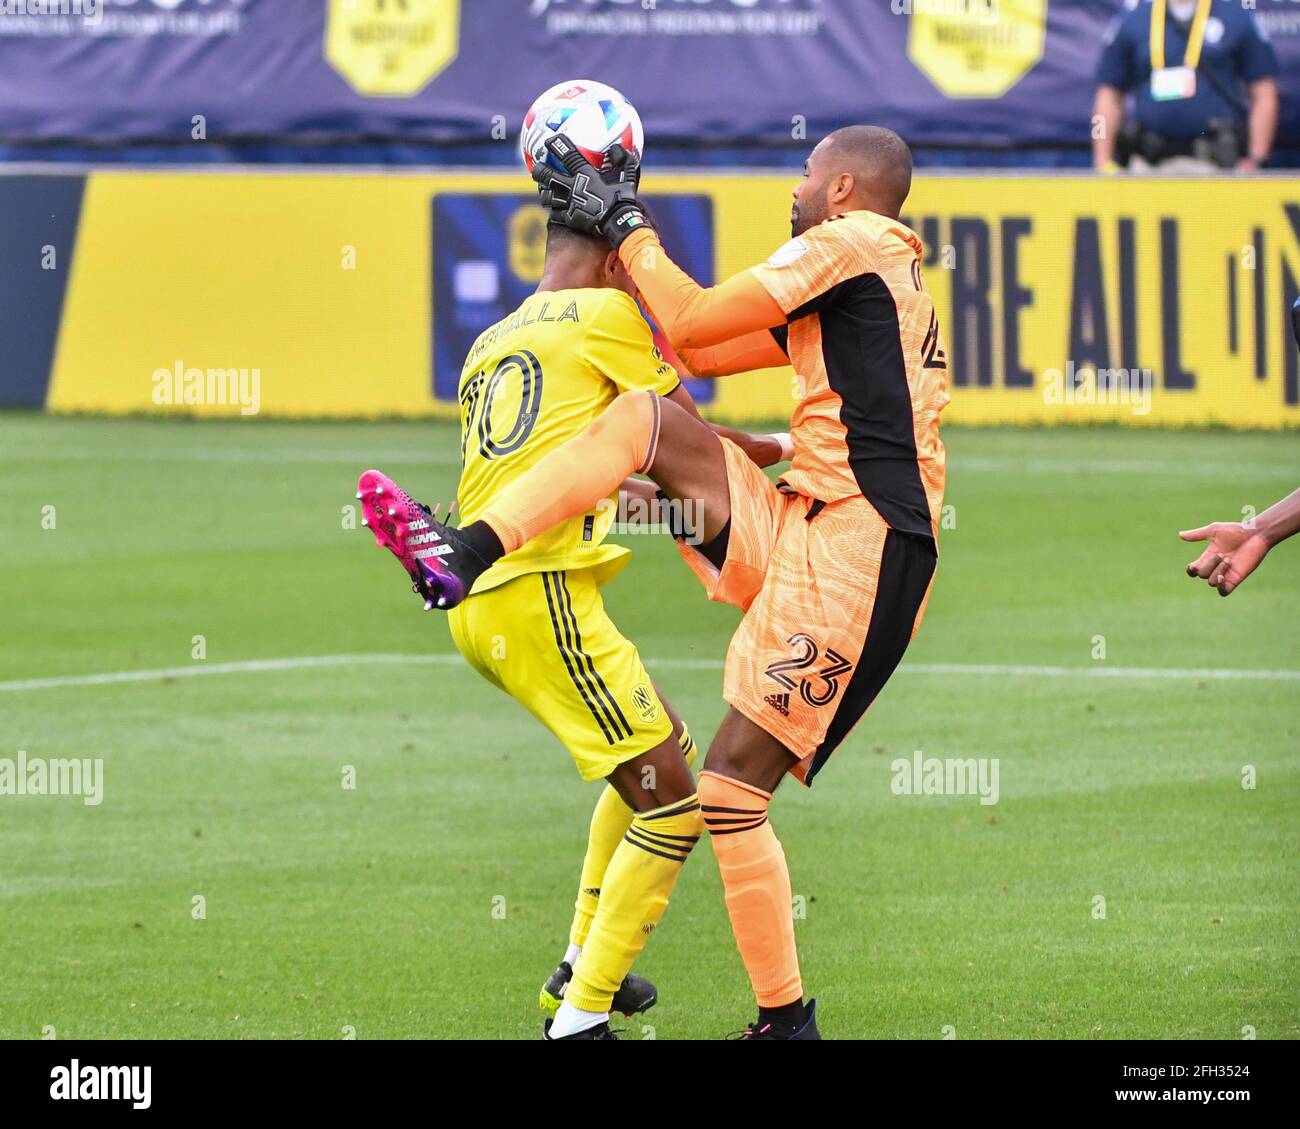 Nashville, TN, USA. 24th Apr, 2021. Montreal goalkeeper, Clement Diop (23), makes a save in front of the goal during the MLS match between CF Montreal and Nashville SC at Nissan Stadium in Nashville, TN. Kevin Langley/CSM/Alamy Live News Stock Photo